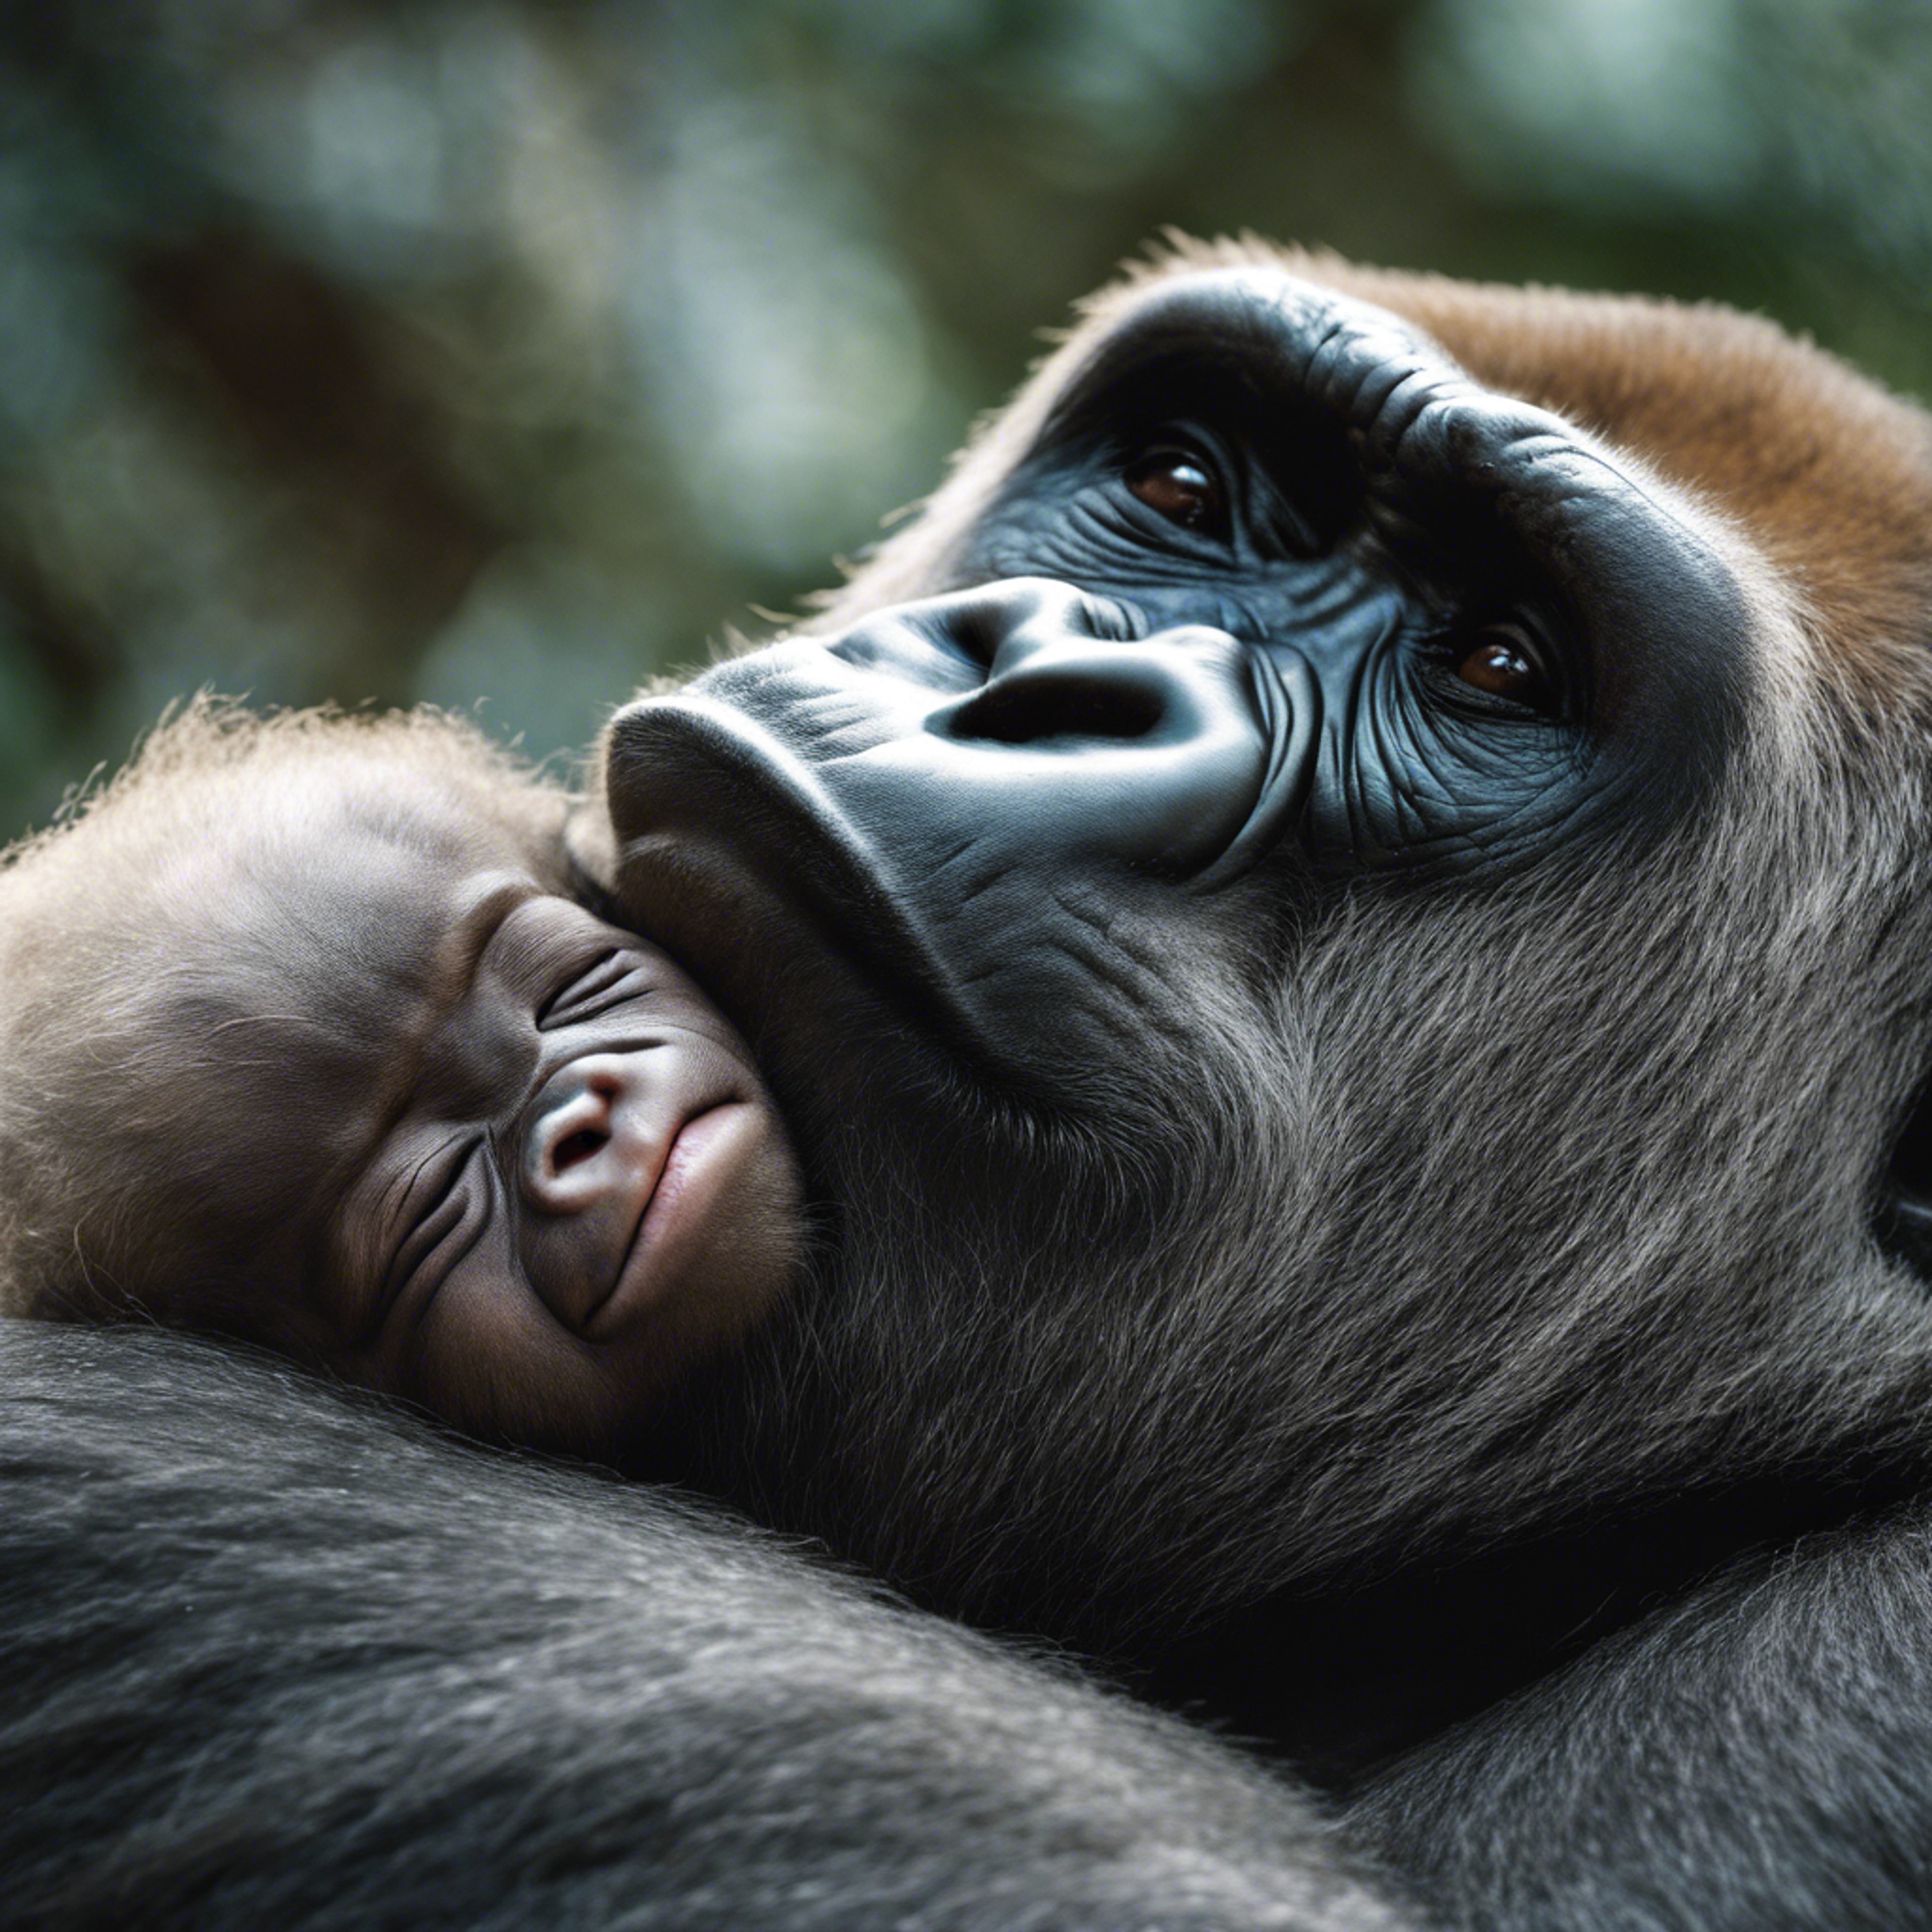 A close-up, emotional study of a gorilla mother's face as she cradles her sleeping newborn. Taustakuva[516e0f2ed6254482ad03]